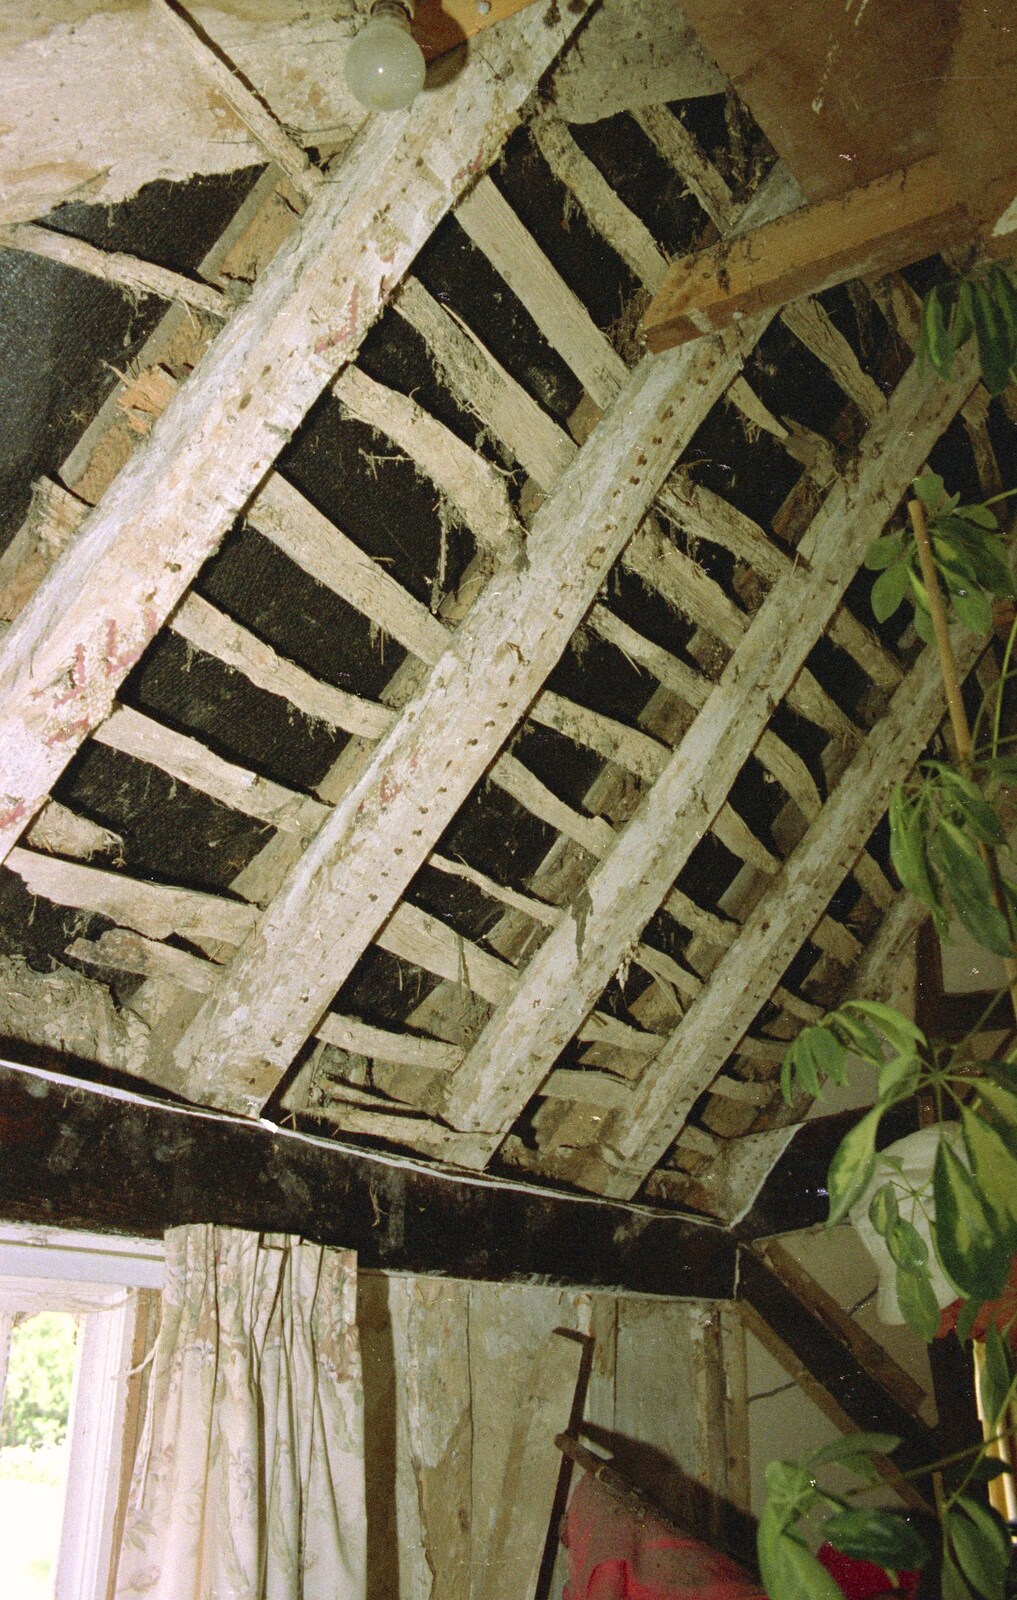 The old timbers, and some lath from Hale-Bopp and Bedroom Demolition, Brome, Suffolk - 10th May 1997